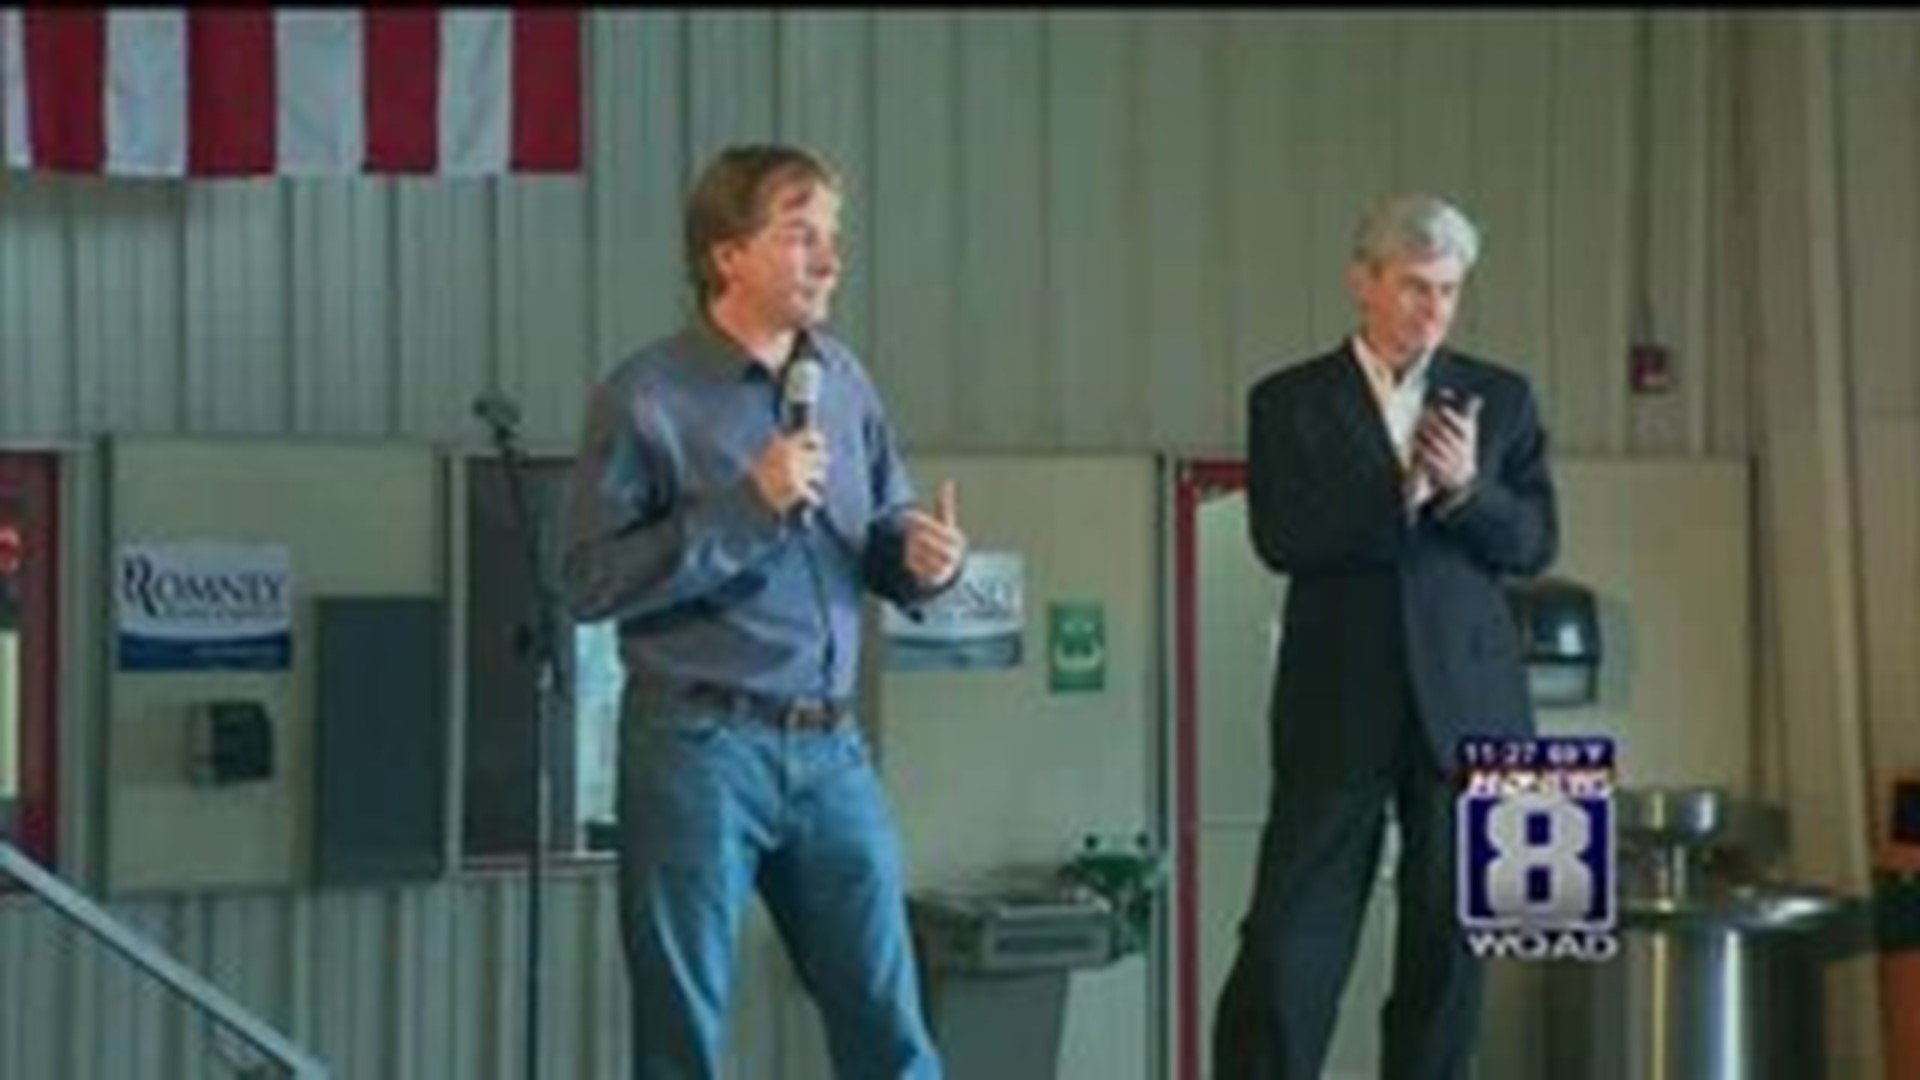 Jeff Foxworthy to host Bible game show